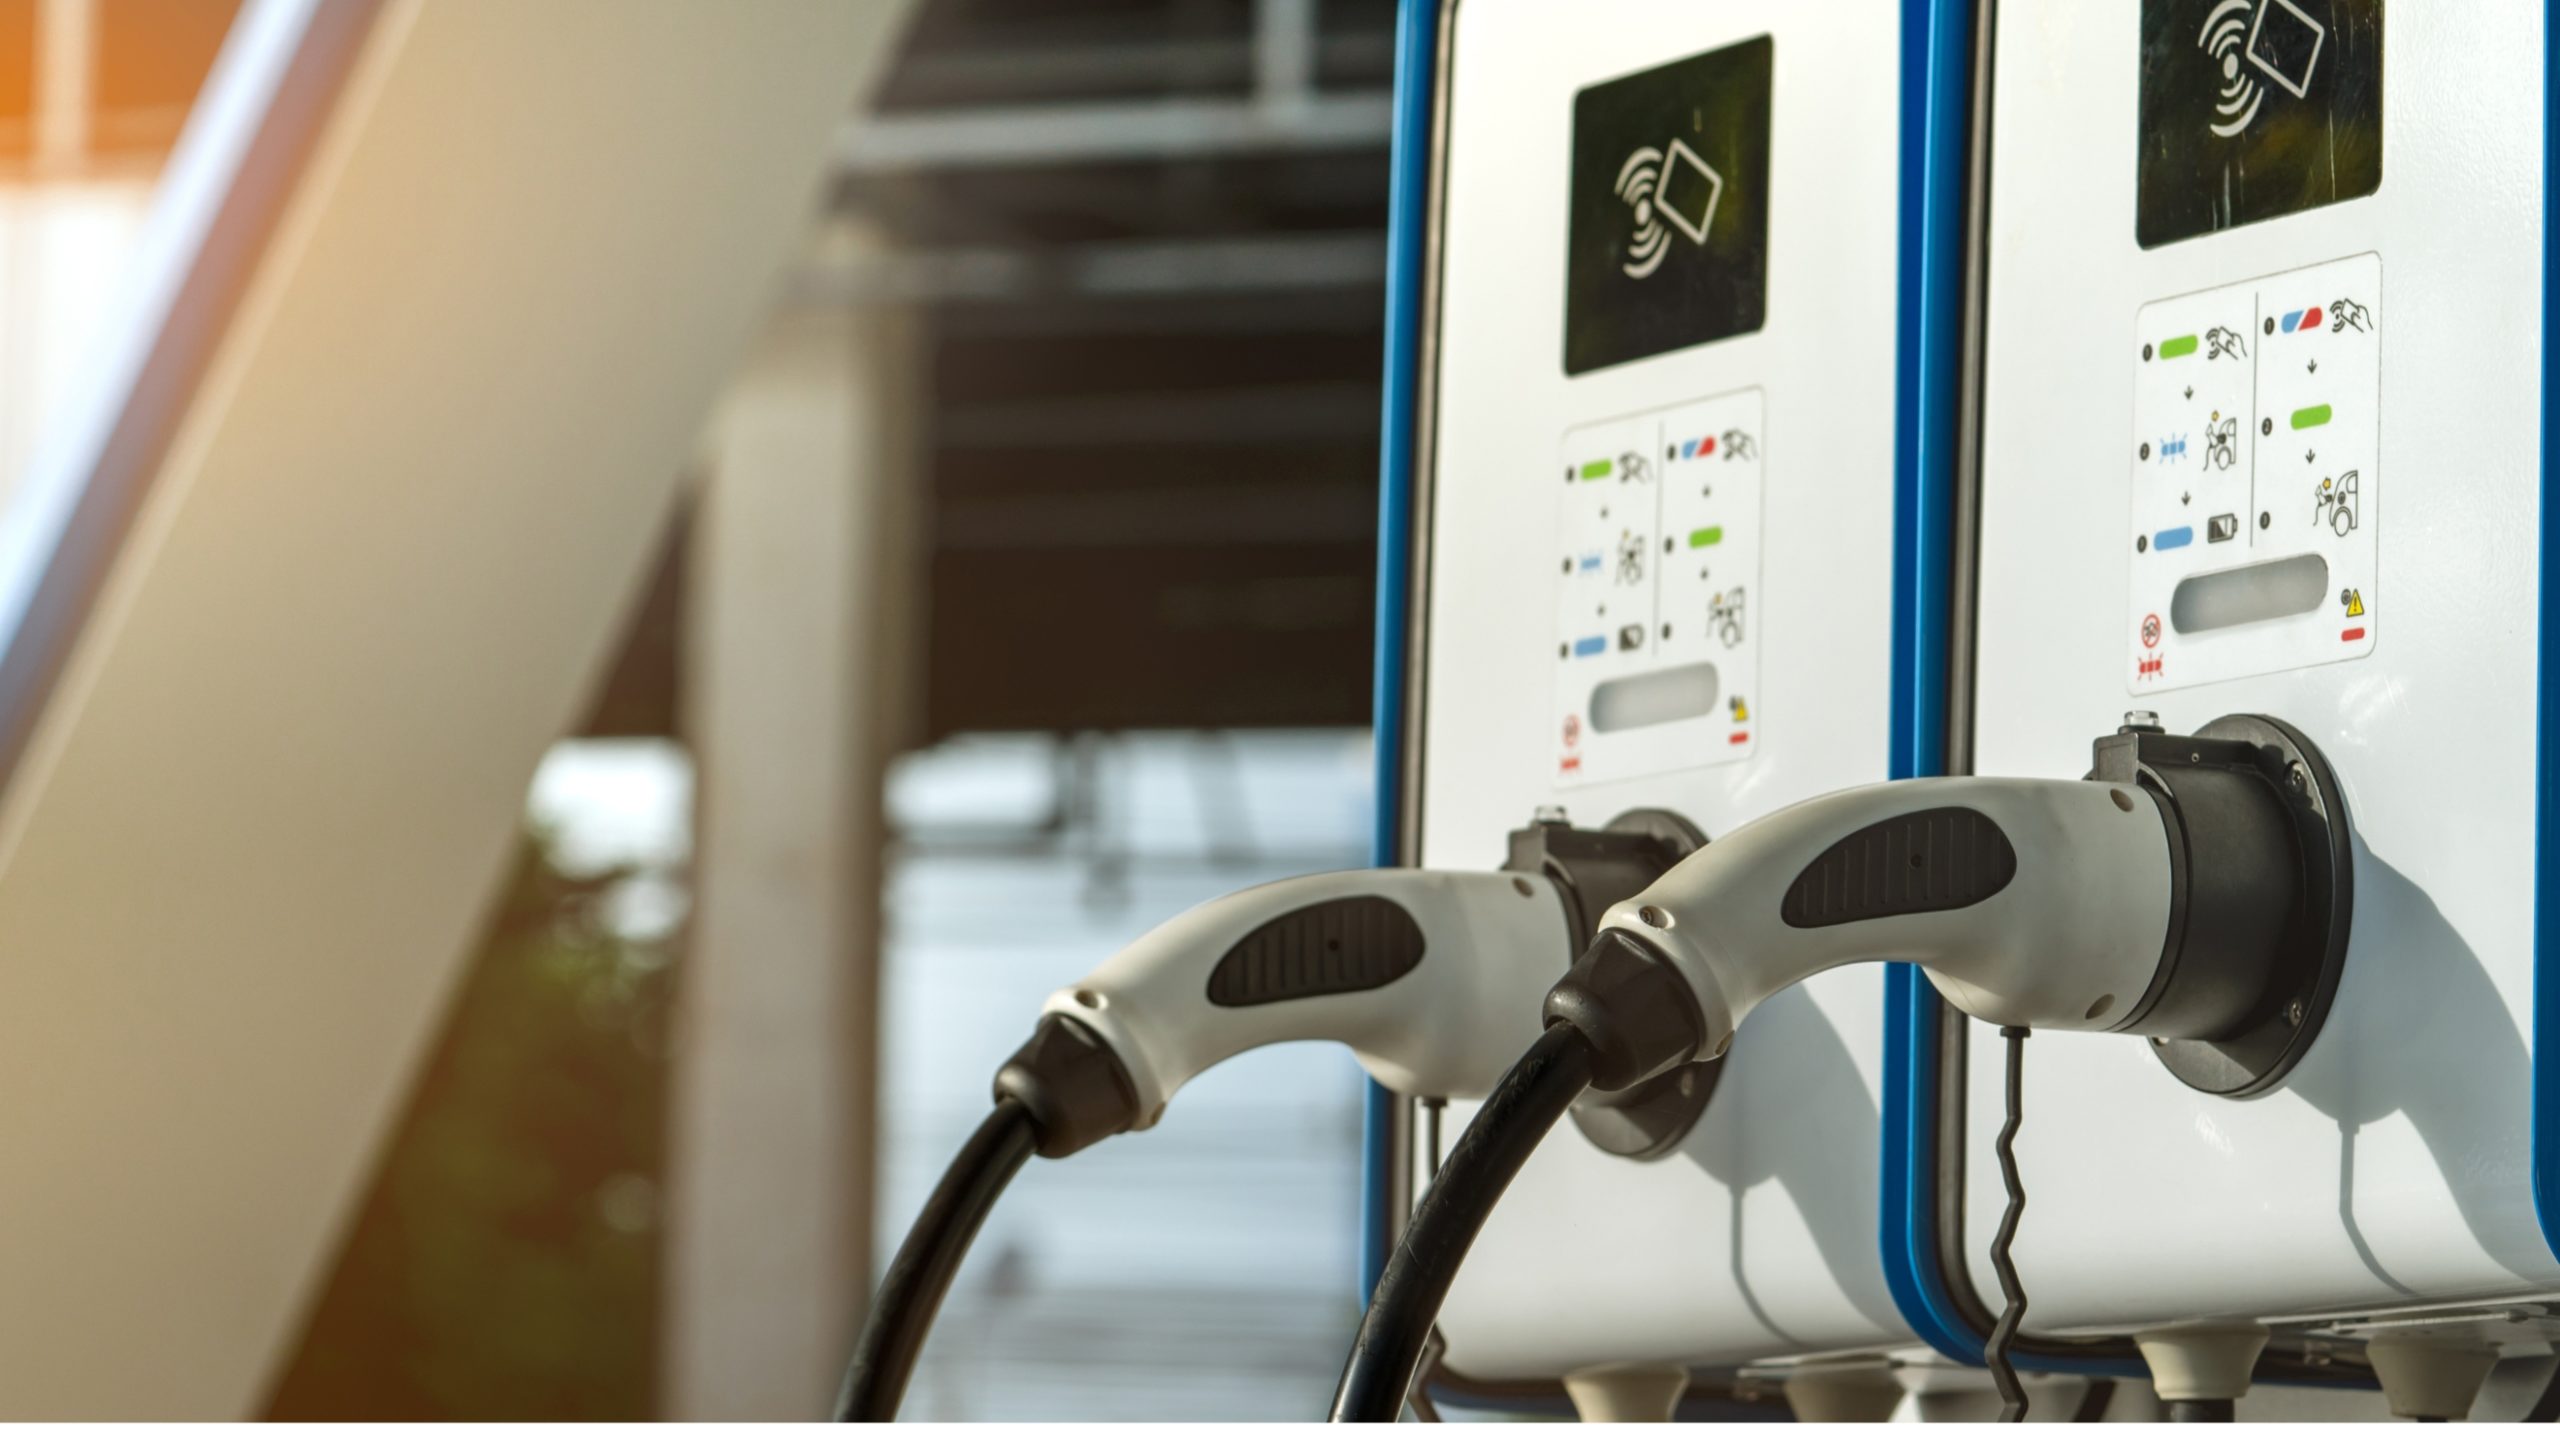 Installing a charging infrastructure for electric vehicles on company premises